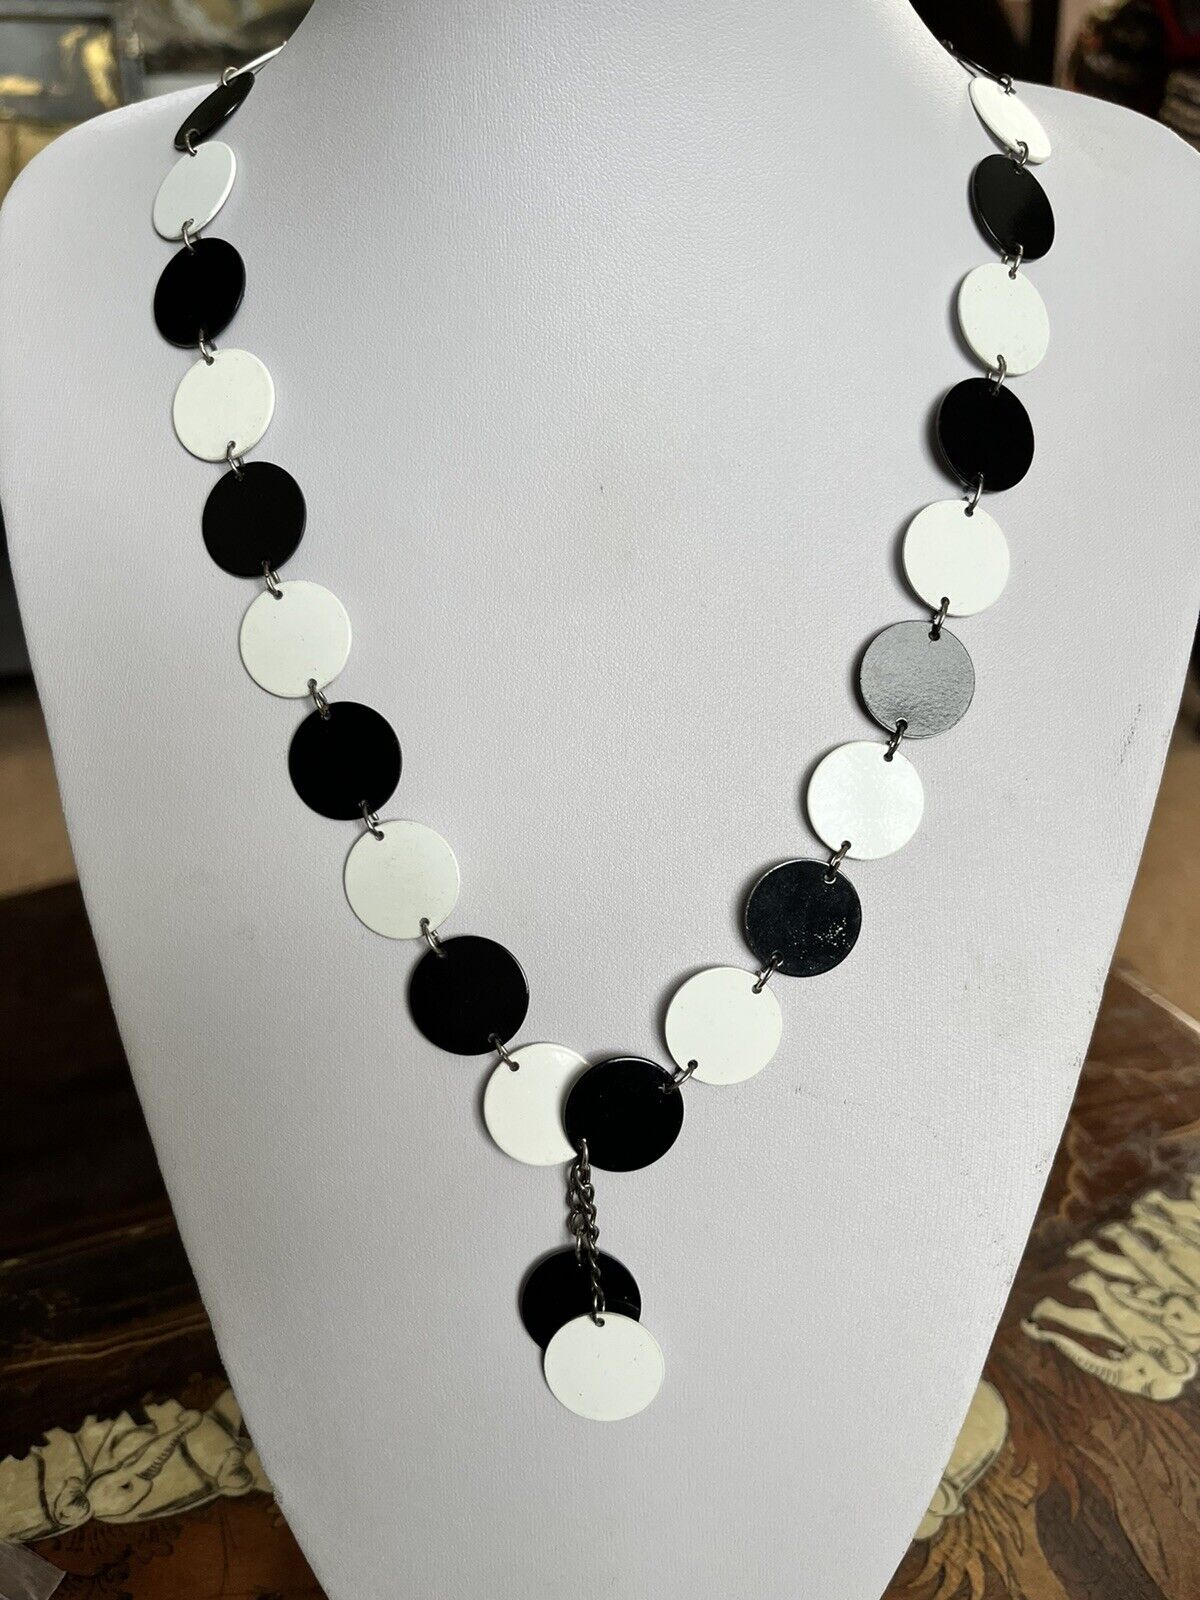 Vintage Black And White Metal Discs Long Length Necklace